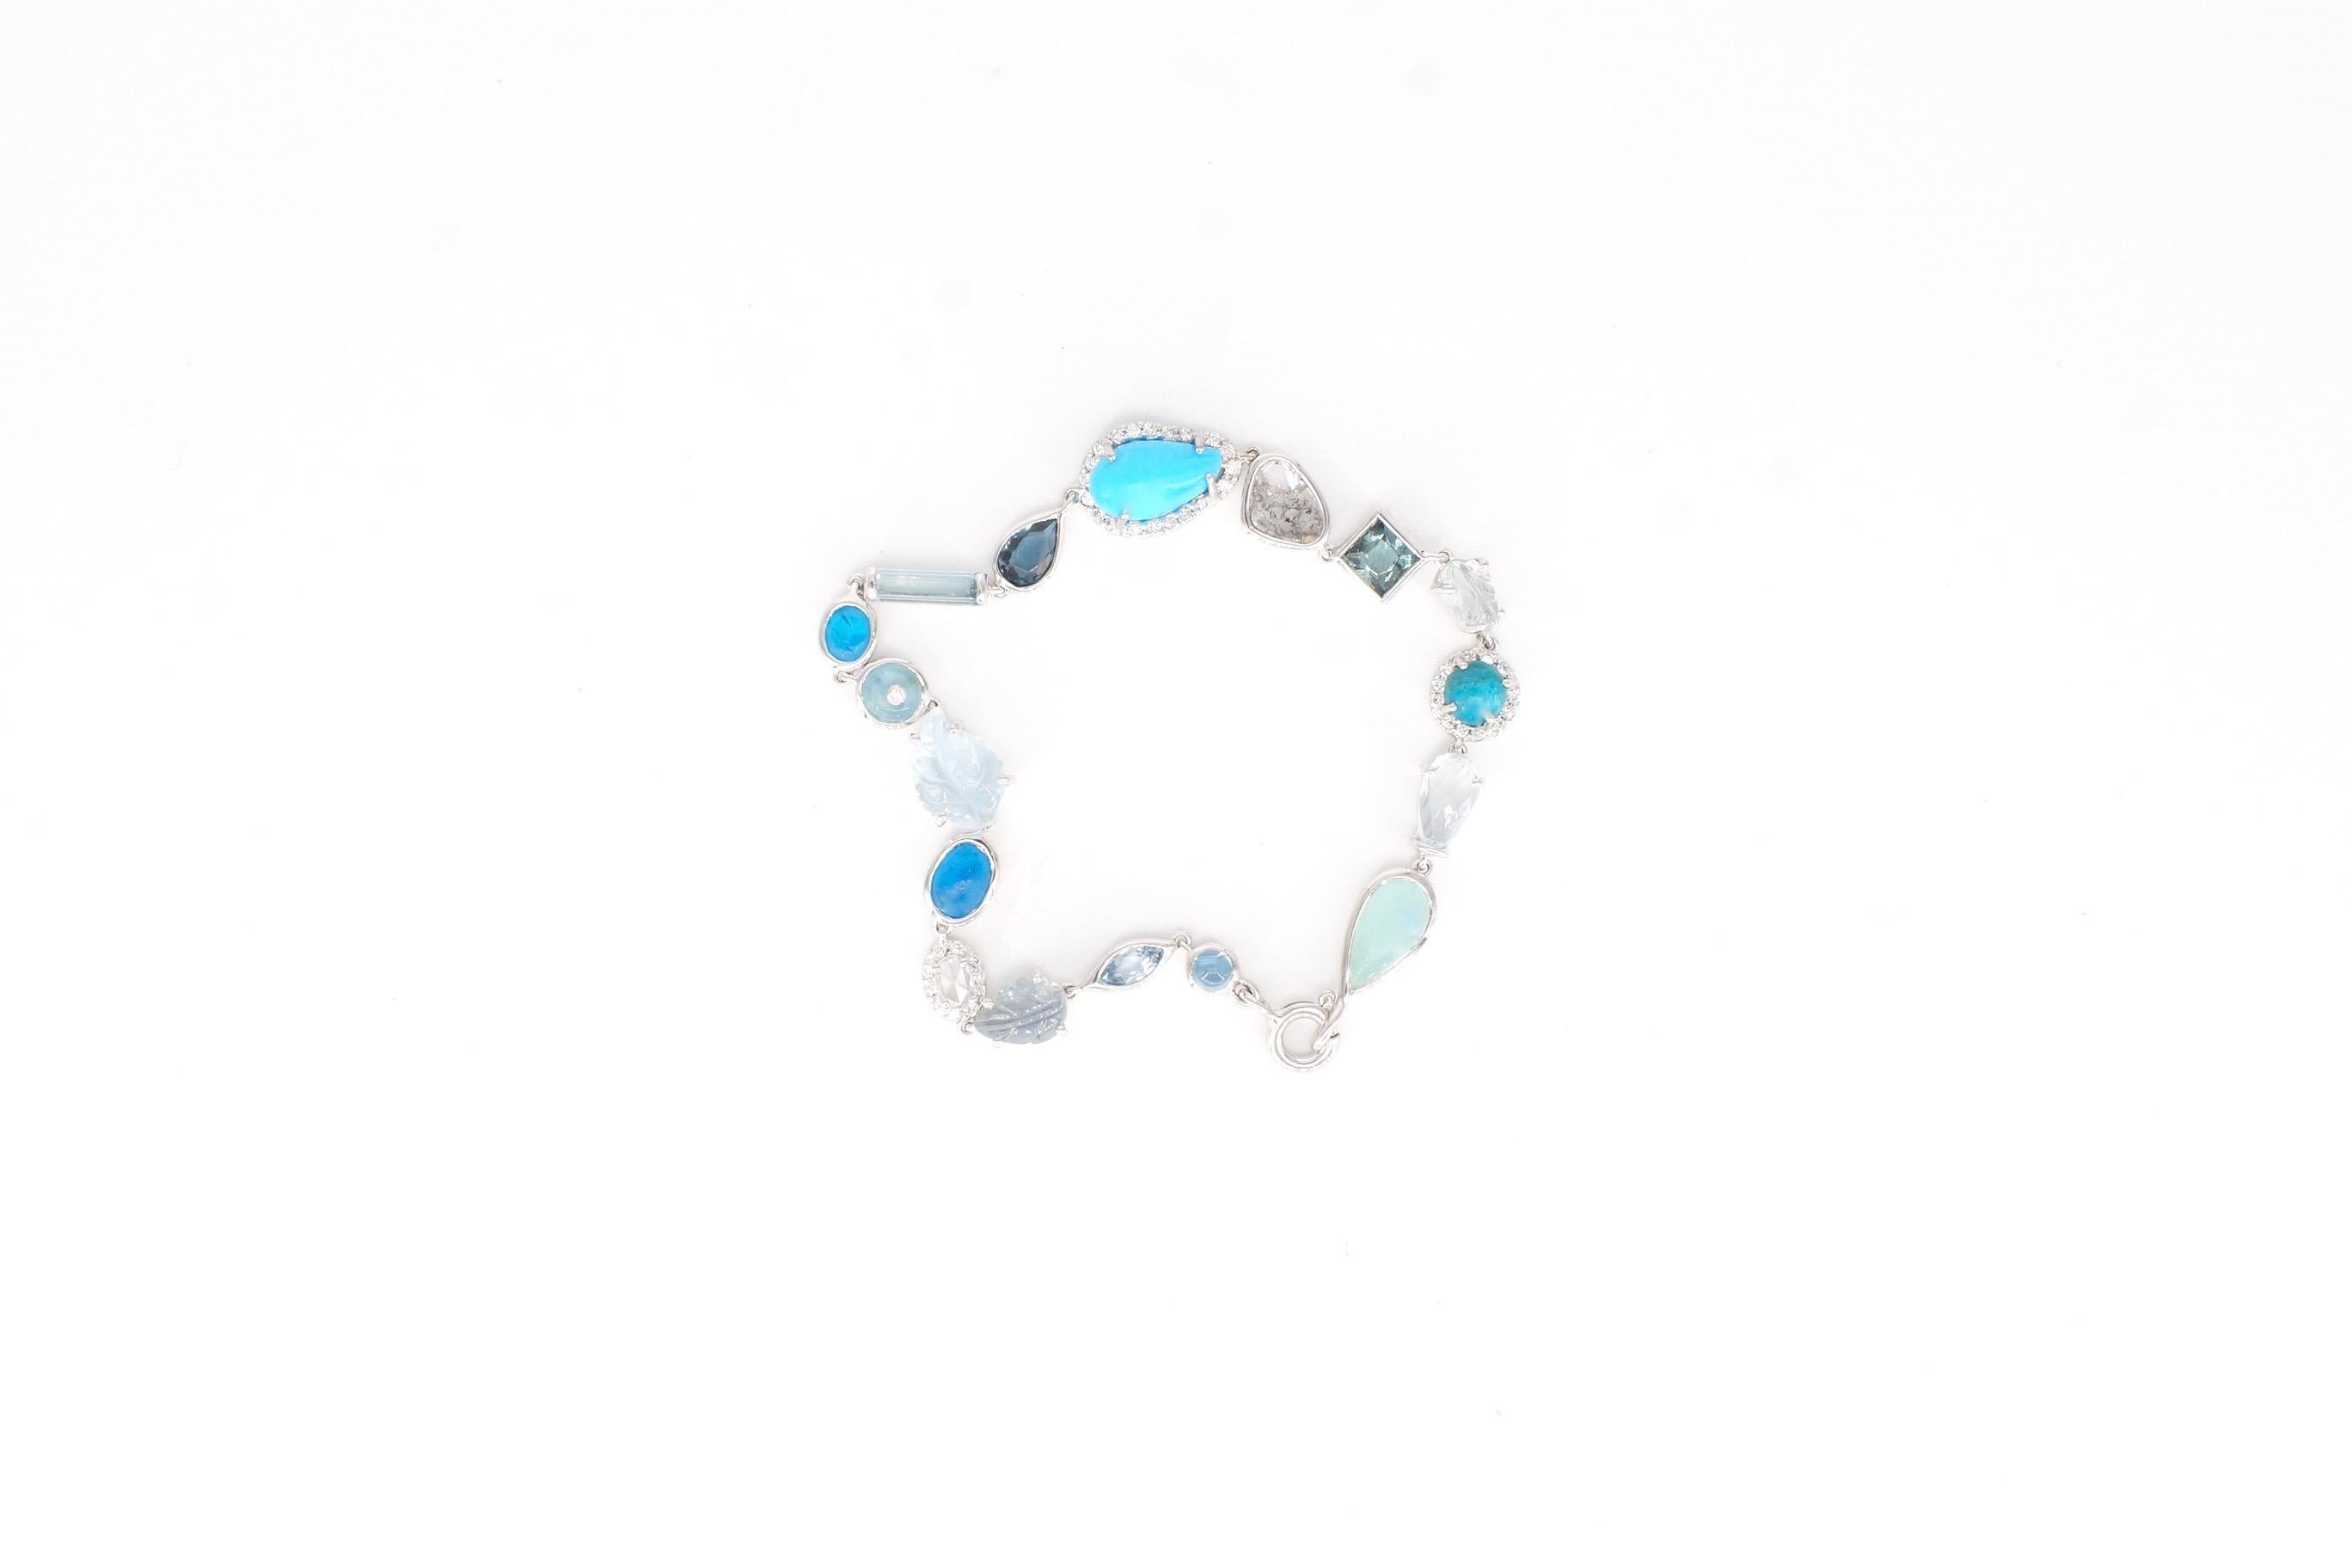 Baby Bracelet
A blue hued gemstone and diamond bracelet, entirely flexible and set in eighteen-karat white gold.
Approximately 7 inches long
17 stones
Diamond Total Weight – 0.385ct.
Gemstone Total Weight – 11.64 cts.
This piece, in its entirety,